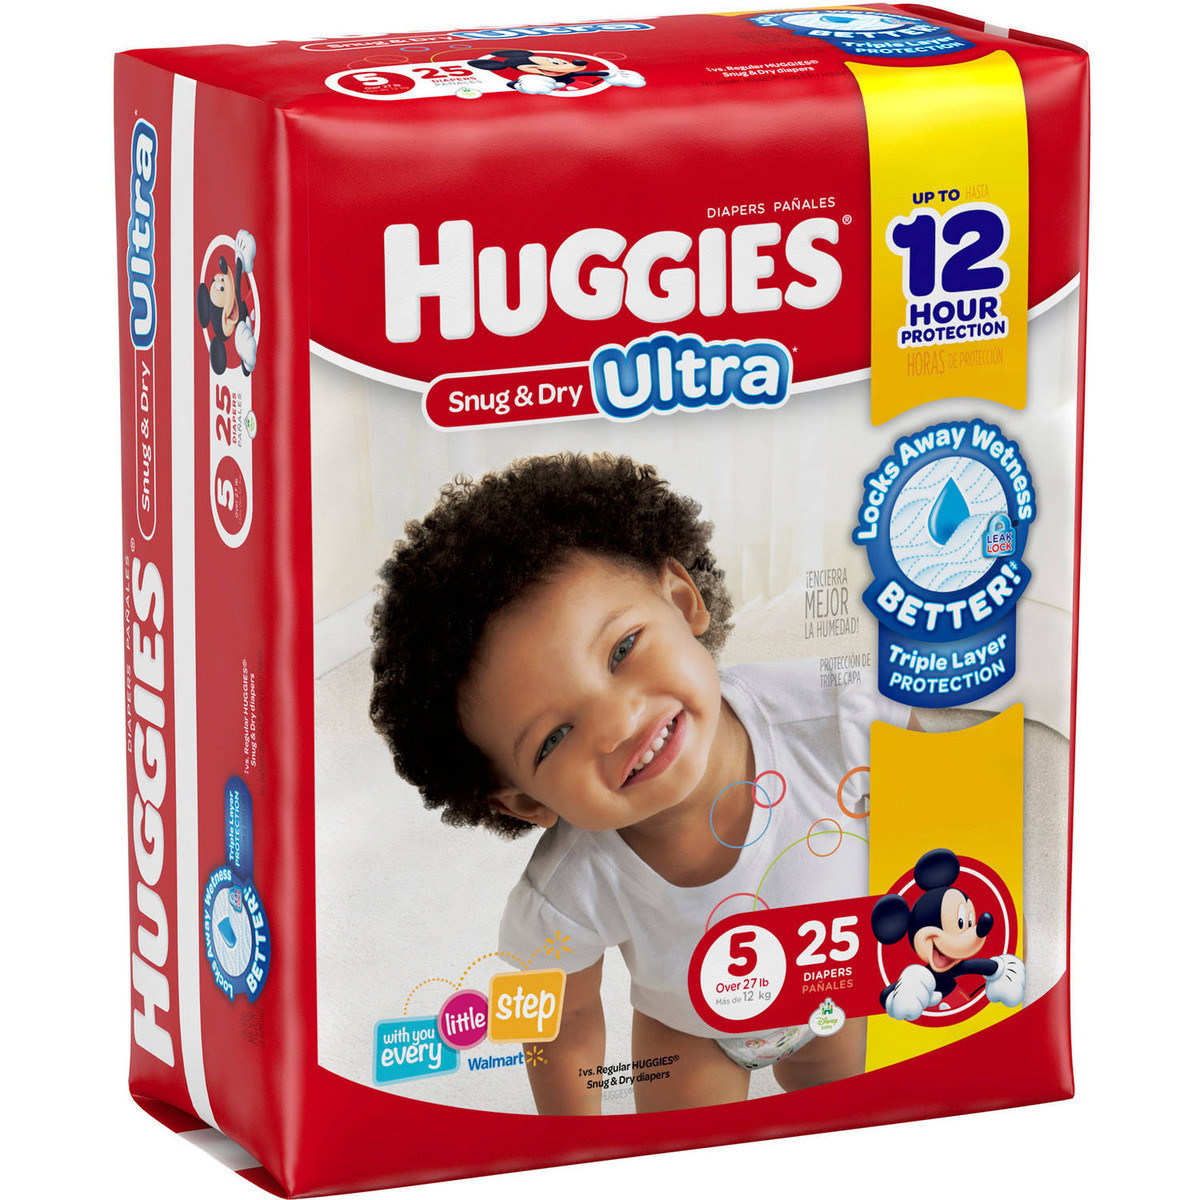 FREE Huggies Diapers at Walmart (After Cash Back)